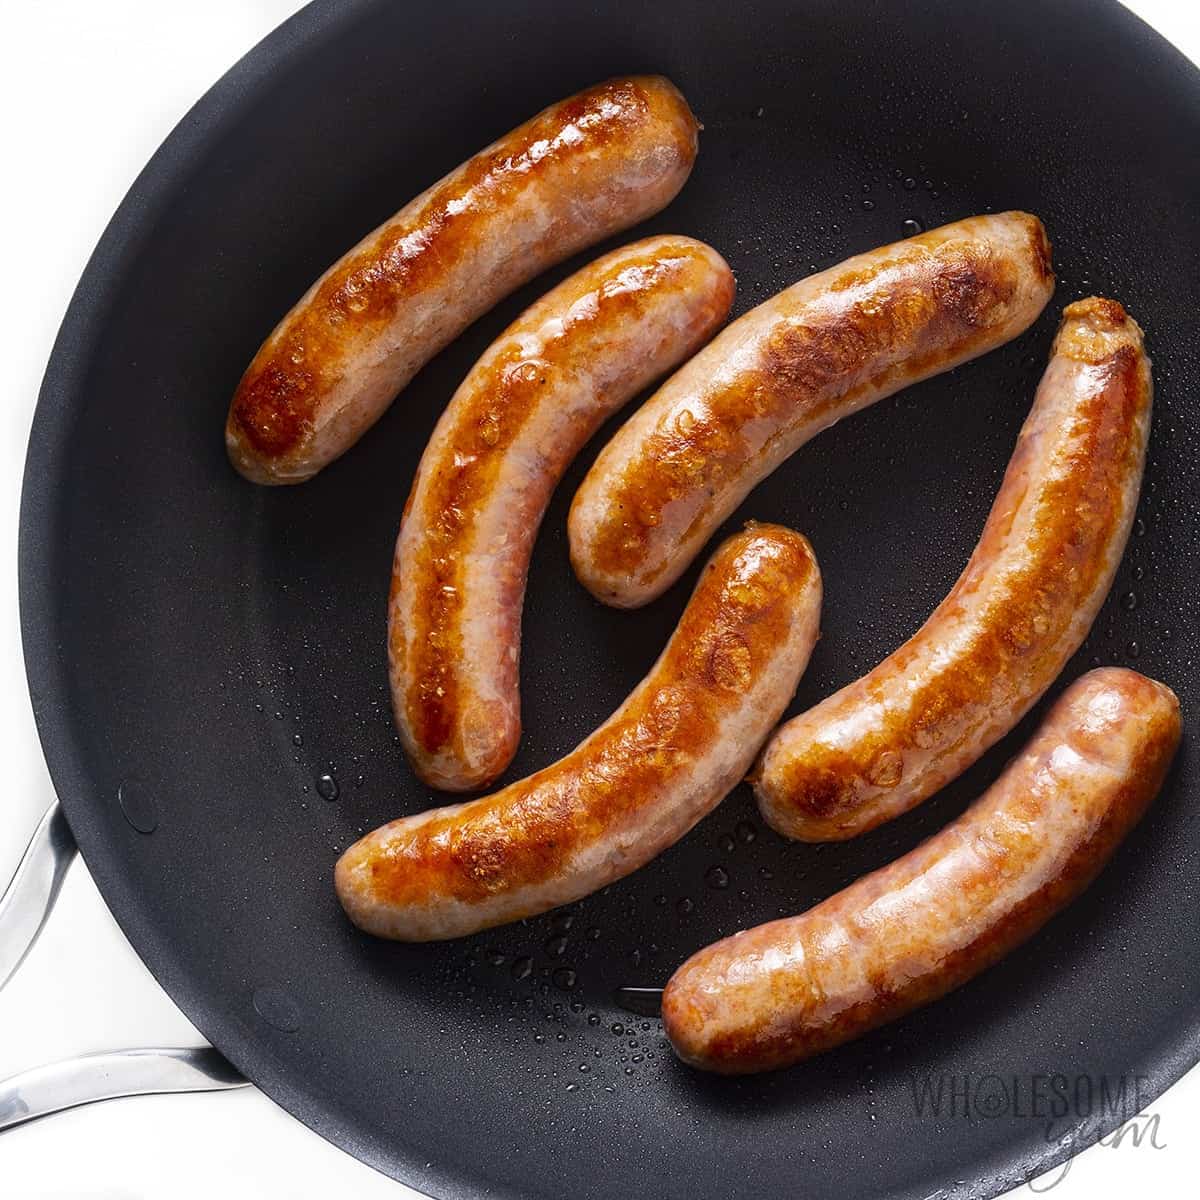 Italian sausage browned in a skillet.